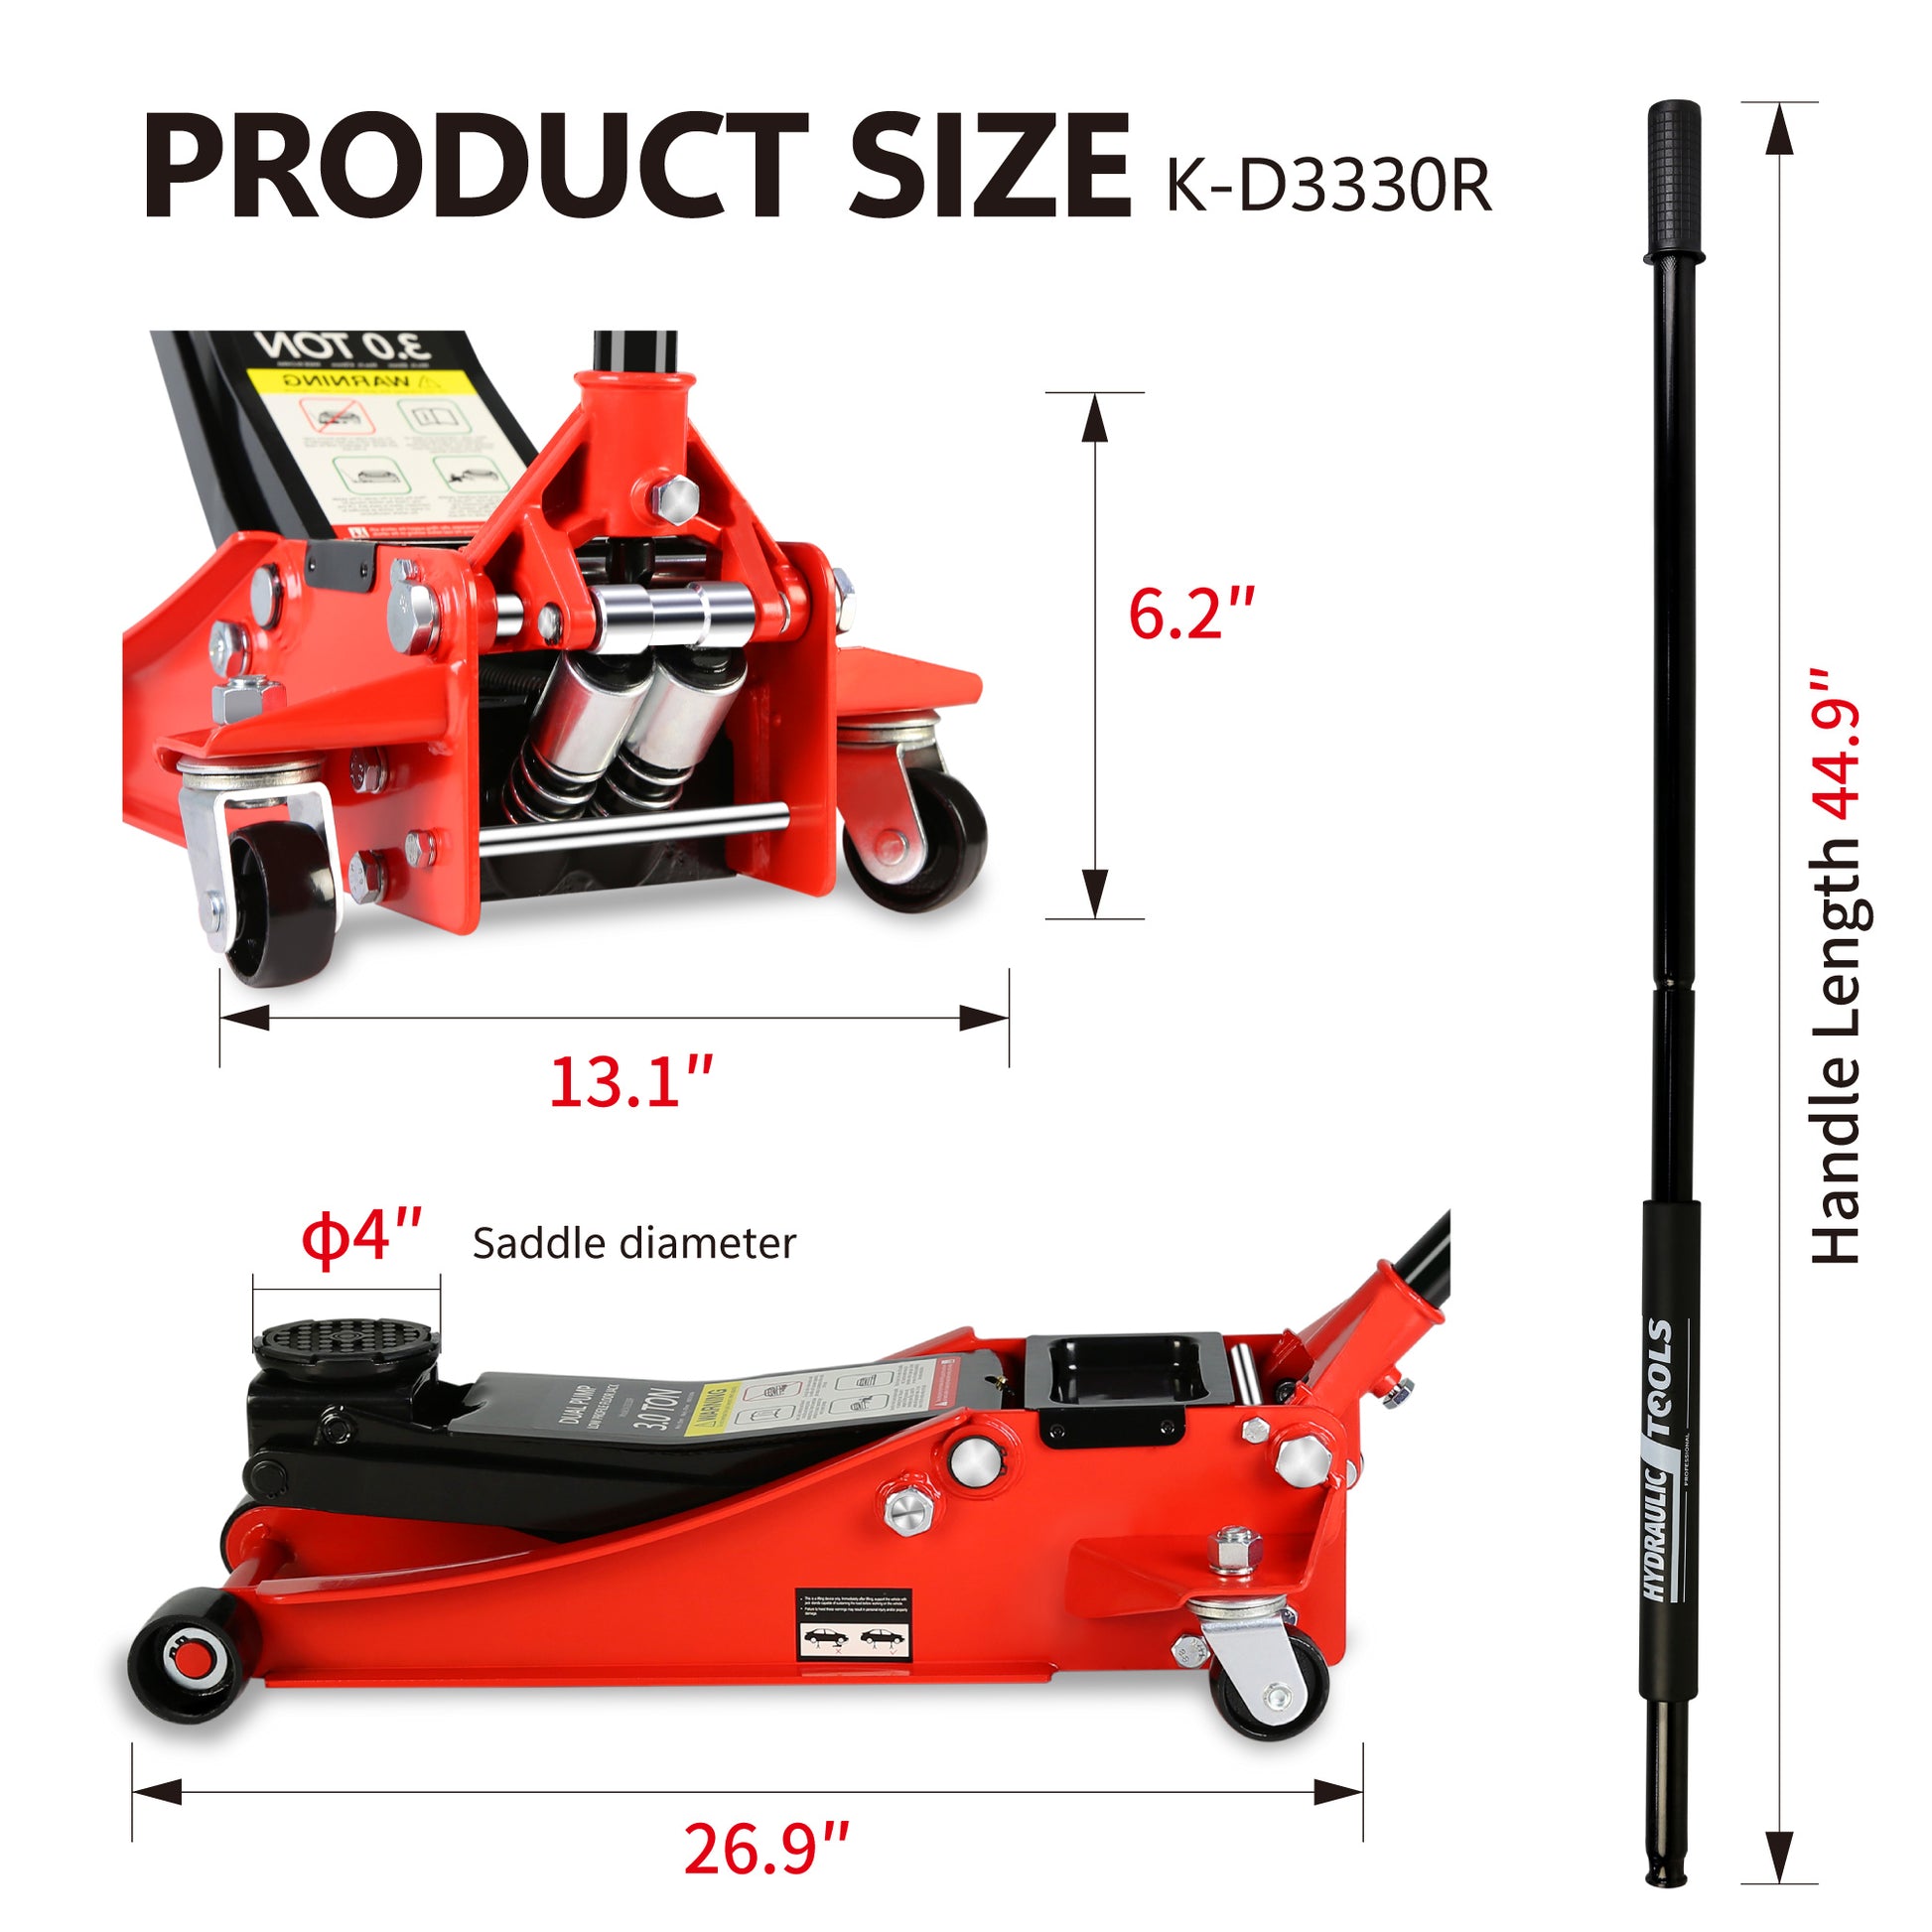 Hydraulic Low Profile and Steel Racing Floor Jack with black+red-steel